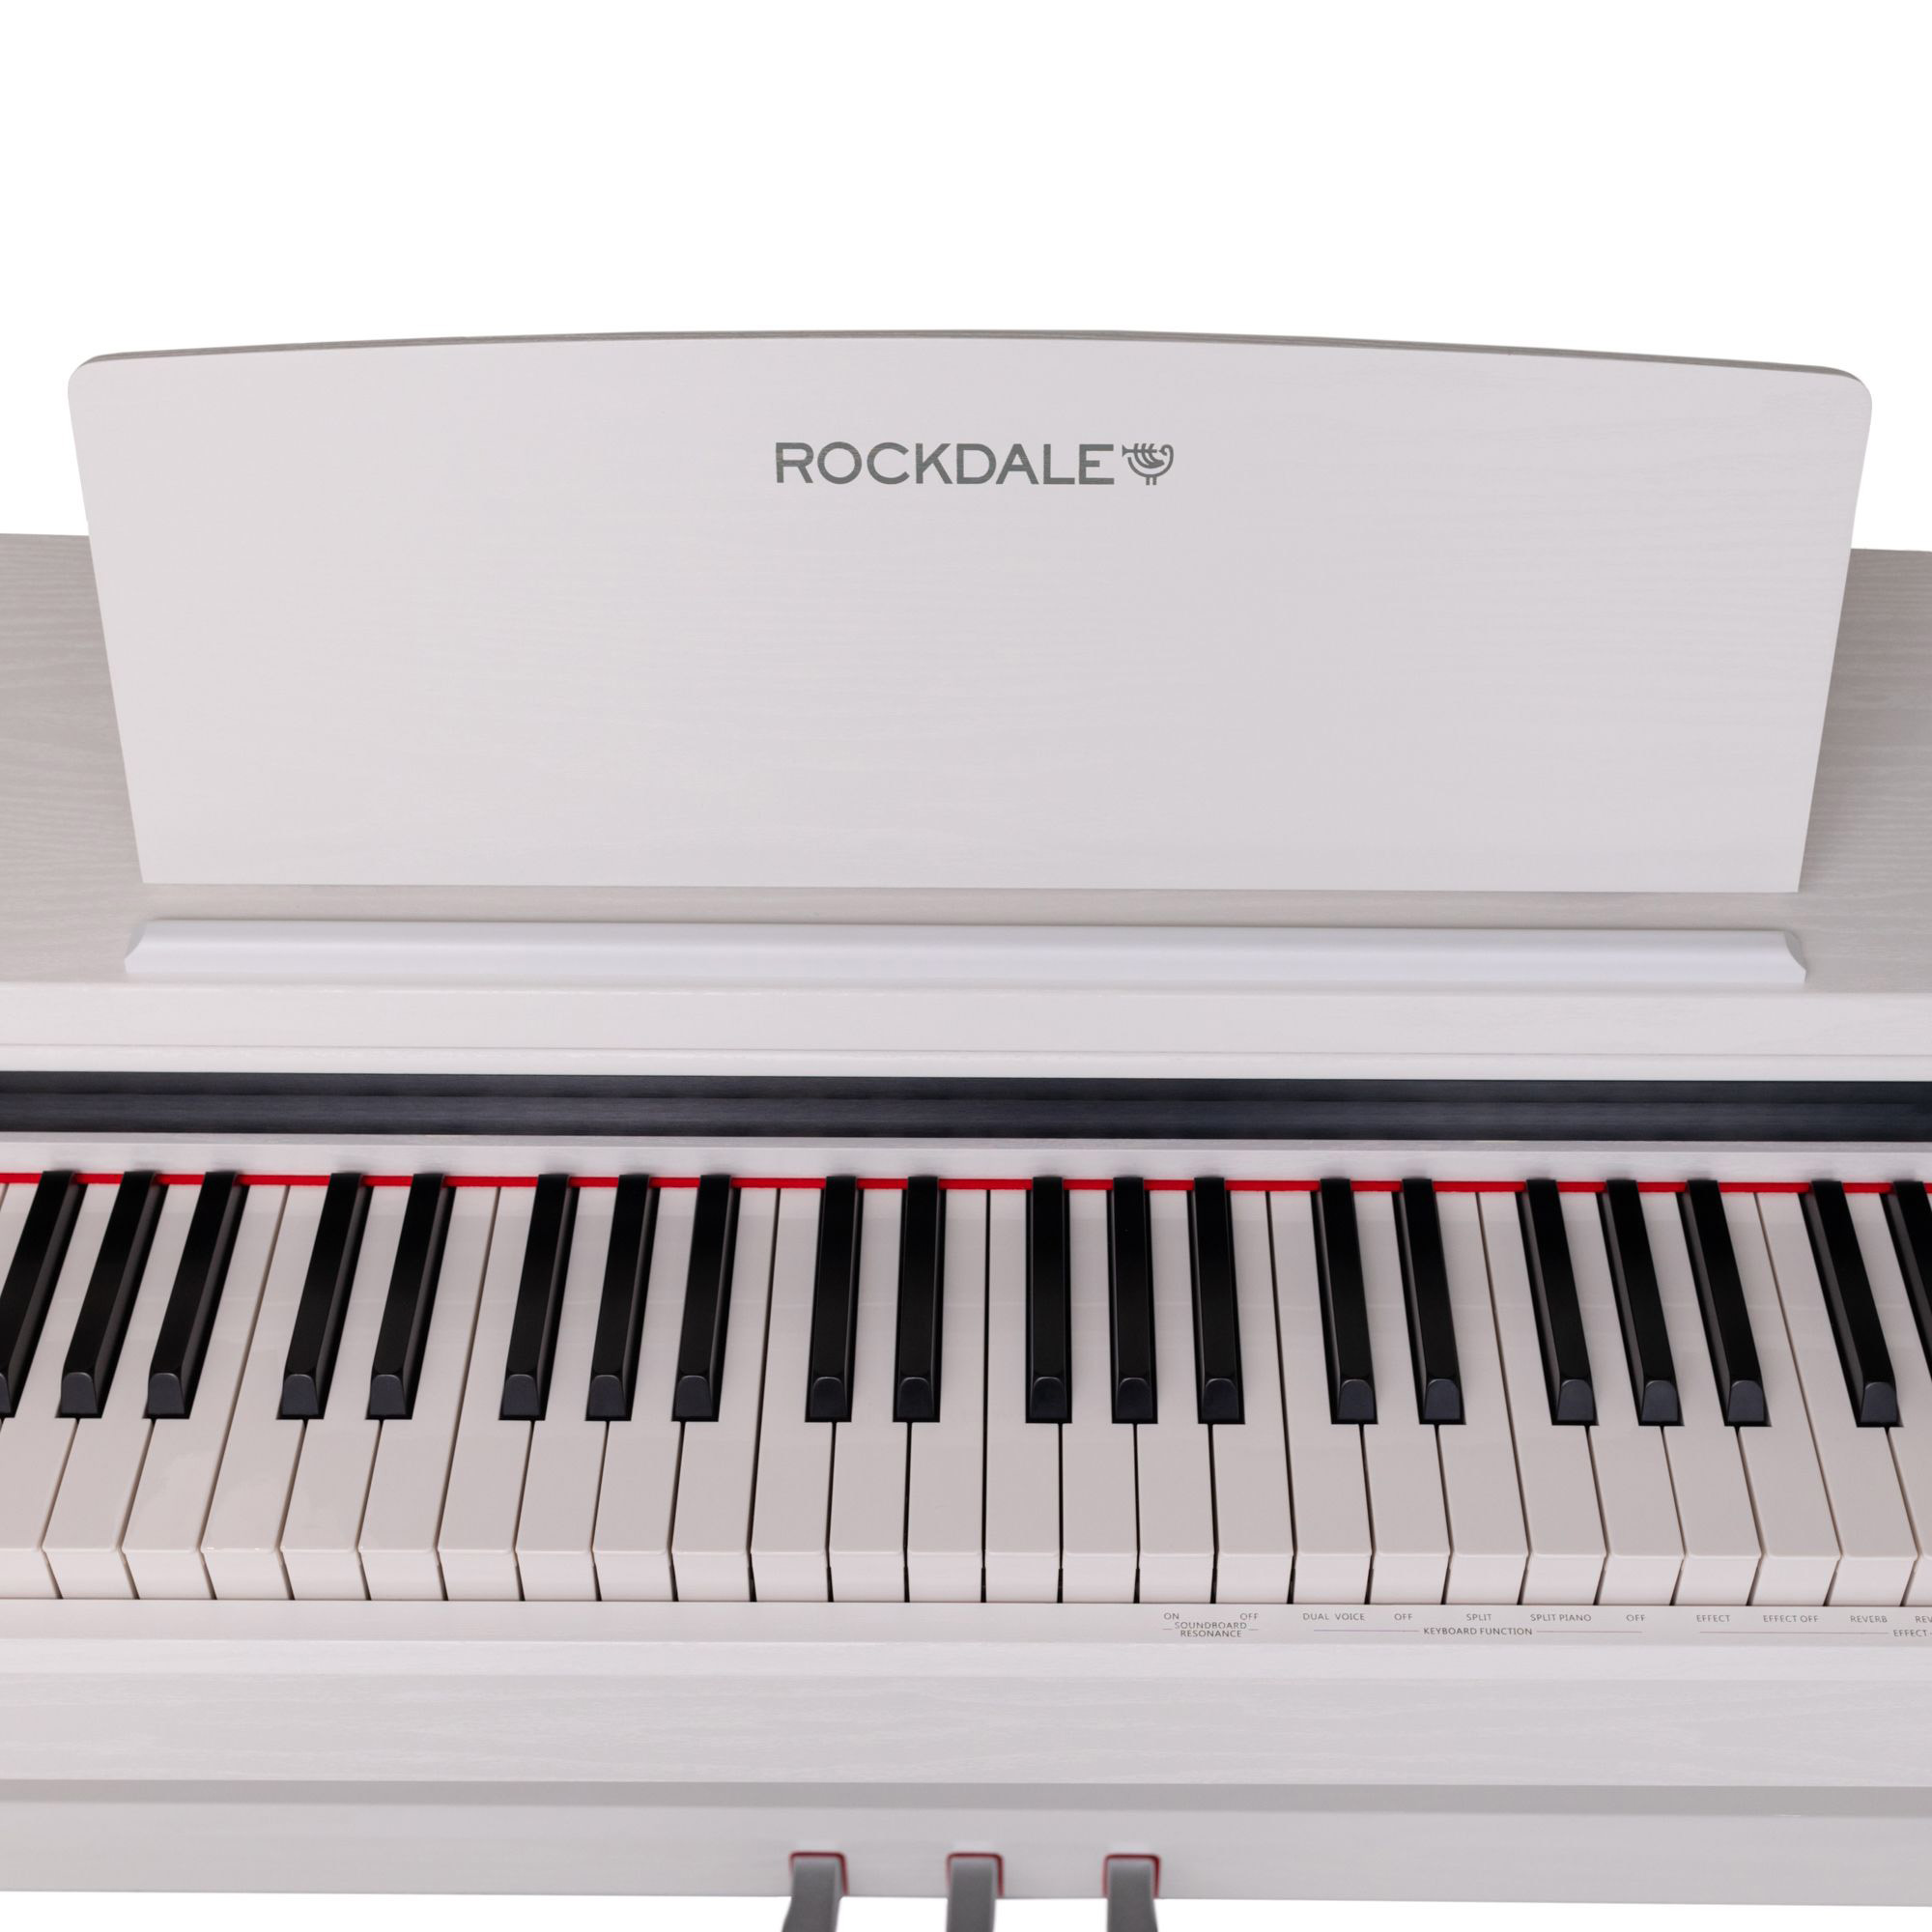 Rockdale Toccata White Цифровые пианино